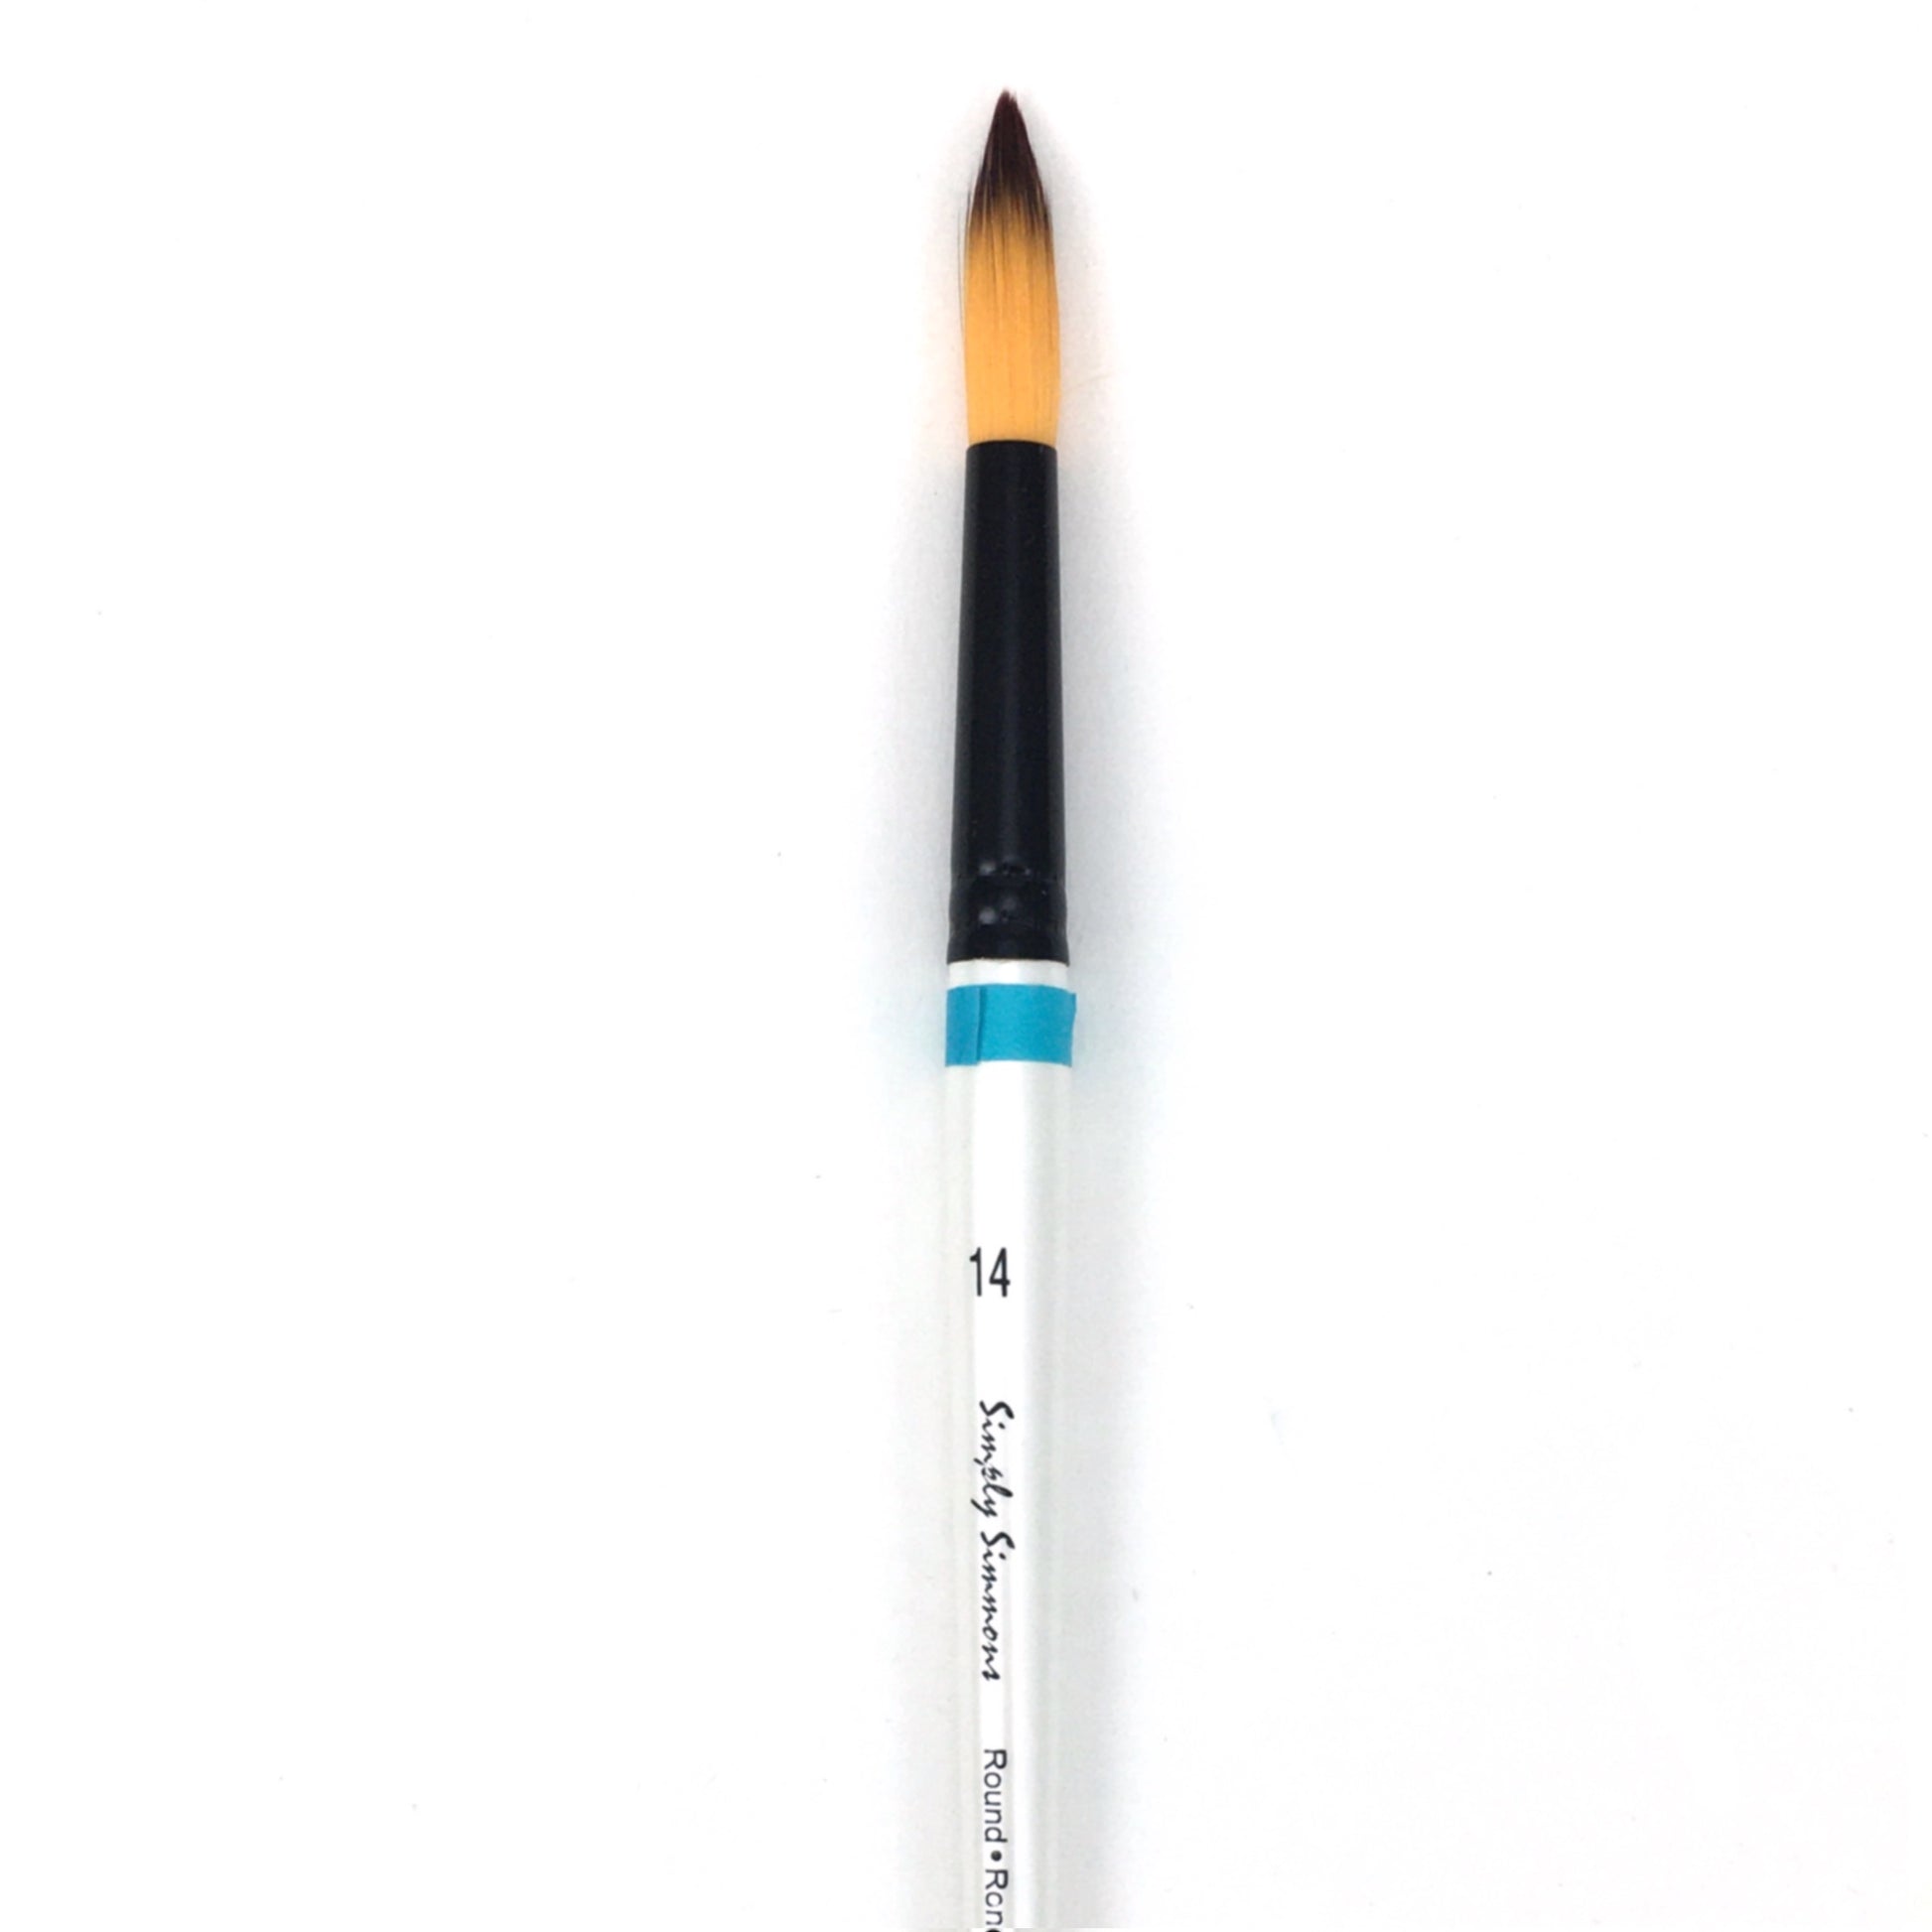 Simply Simmons Watercolor Brush - Short Handle - Round / - #14 / - synthetic by Robert Simmons - K. A. Artist Shop